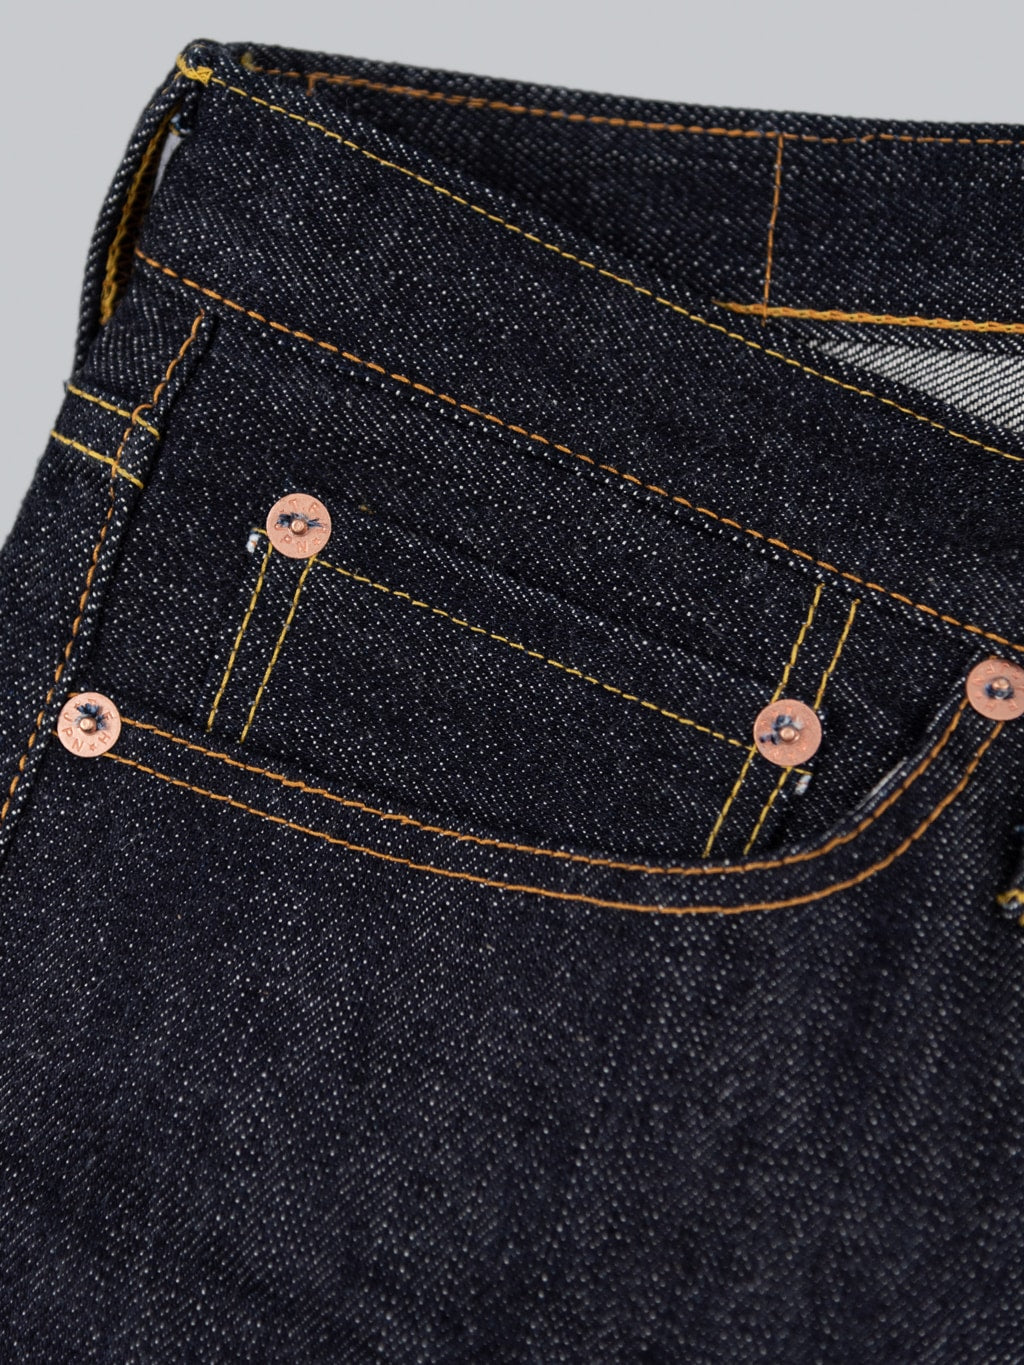 The Flat Head 3002 14.5oz Slim Tapered selvedge Jeans coin pocket